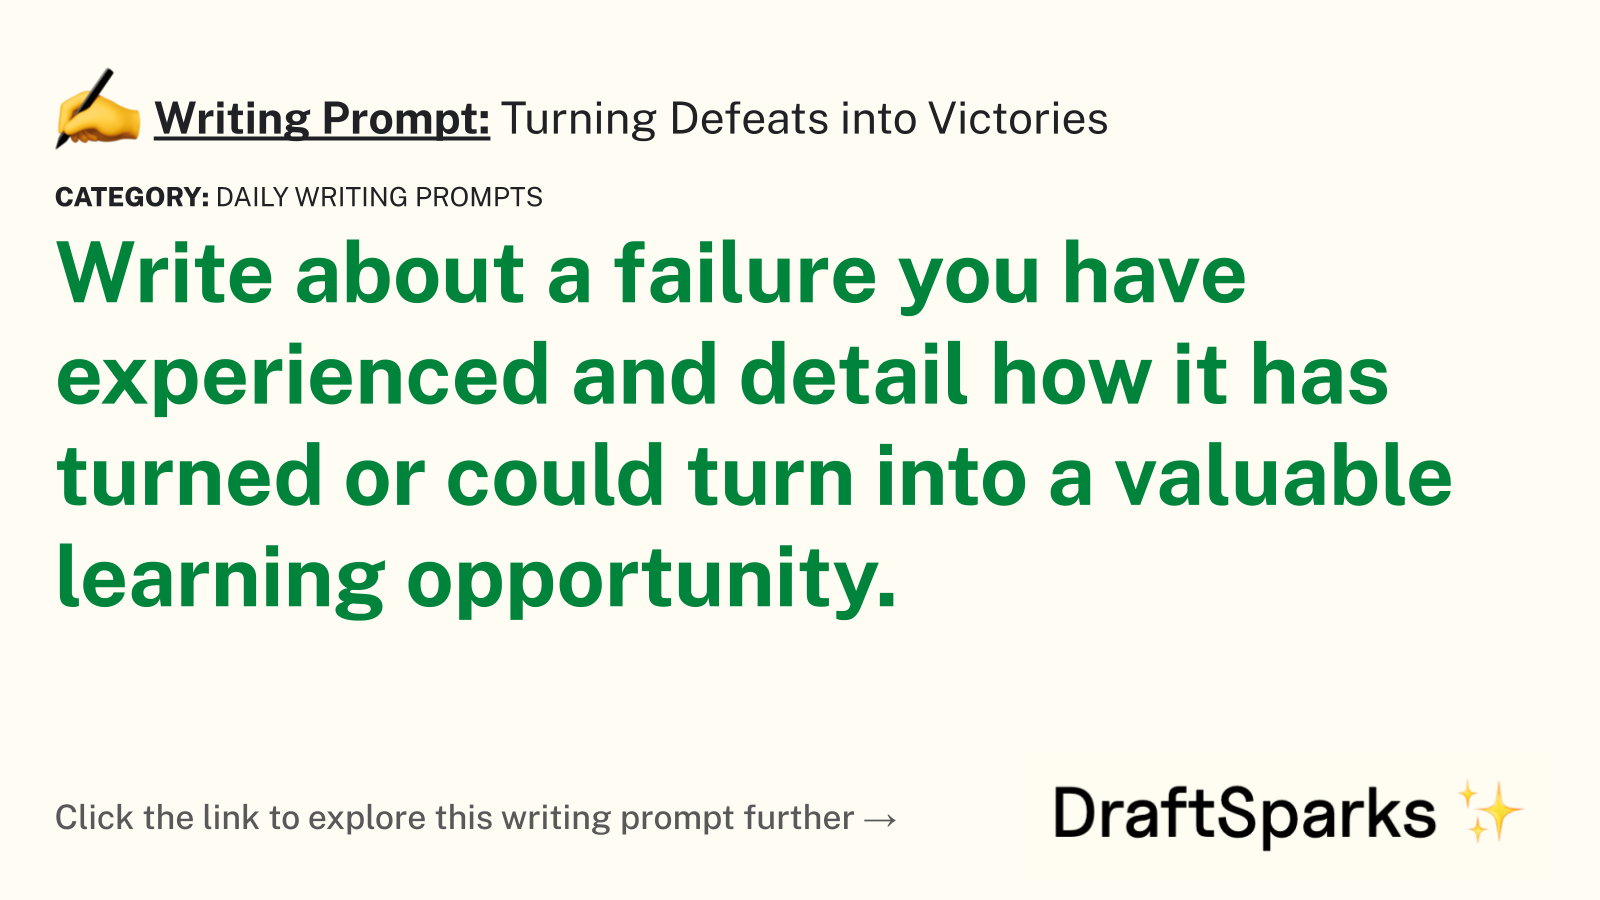 Turning Defeats into Victories